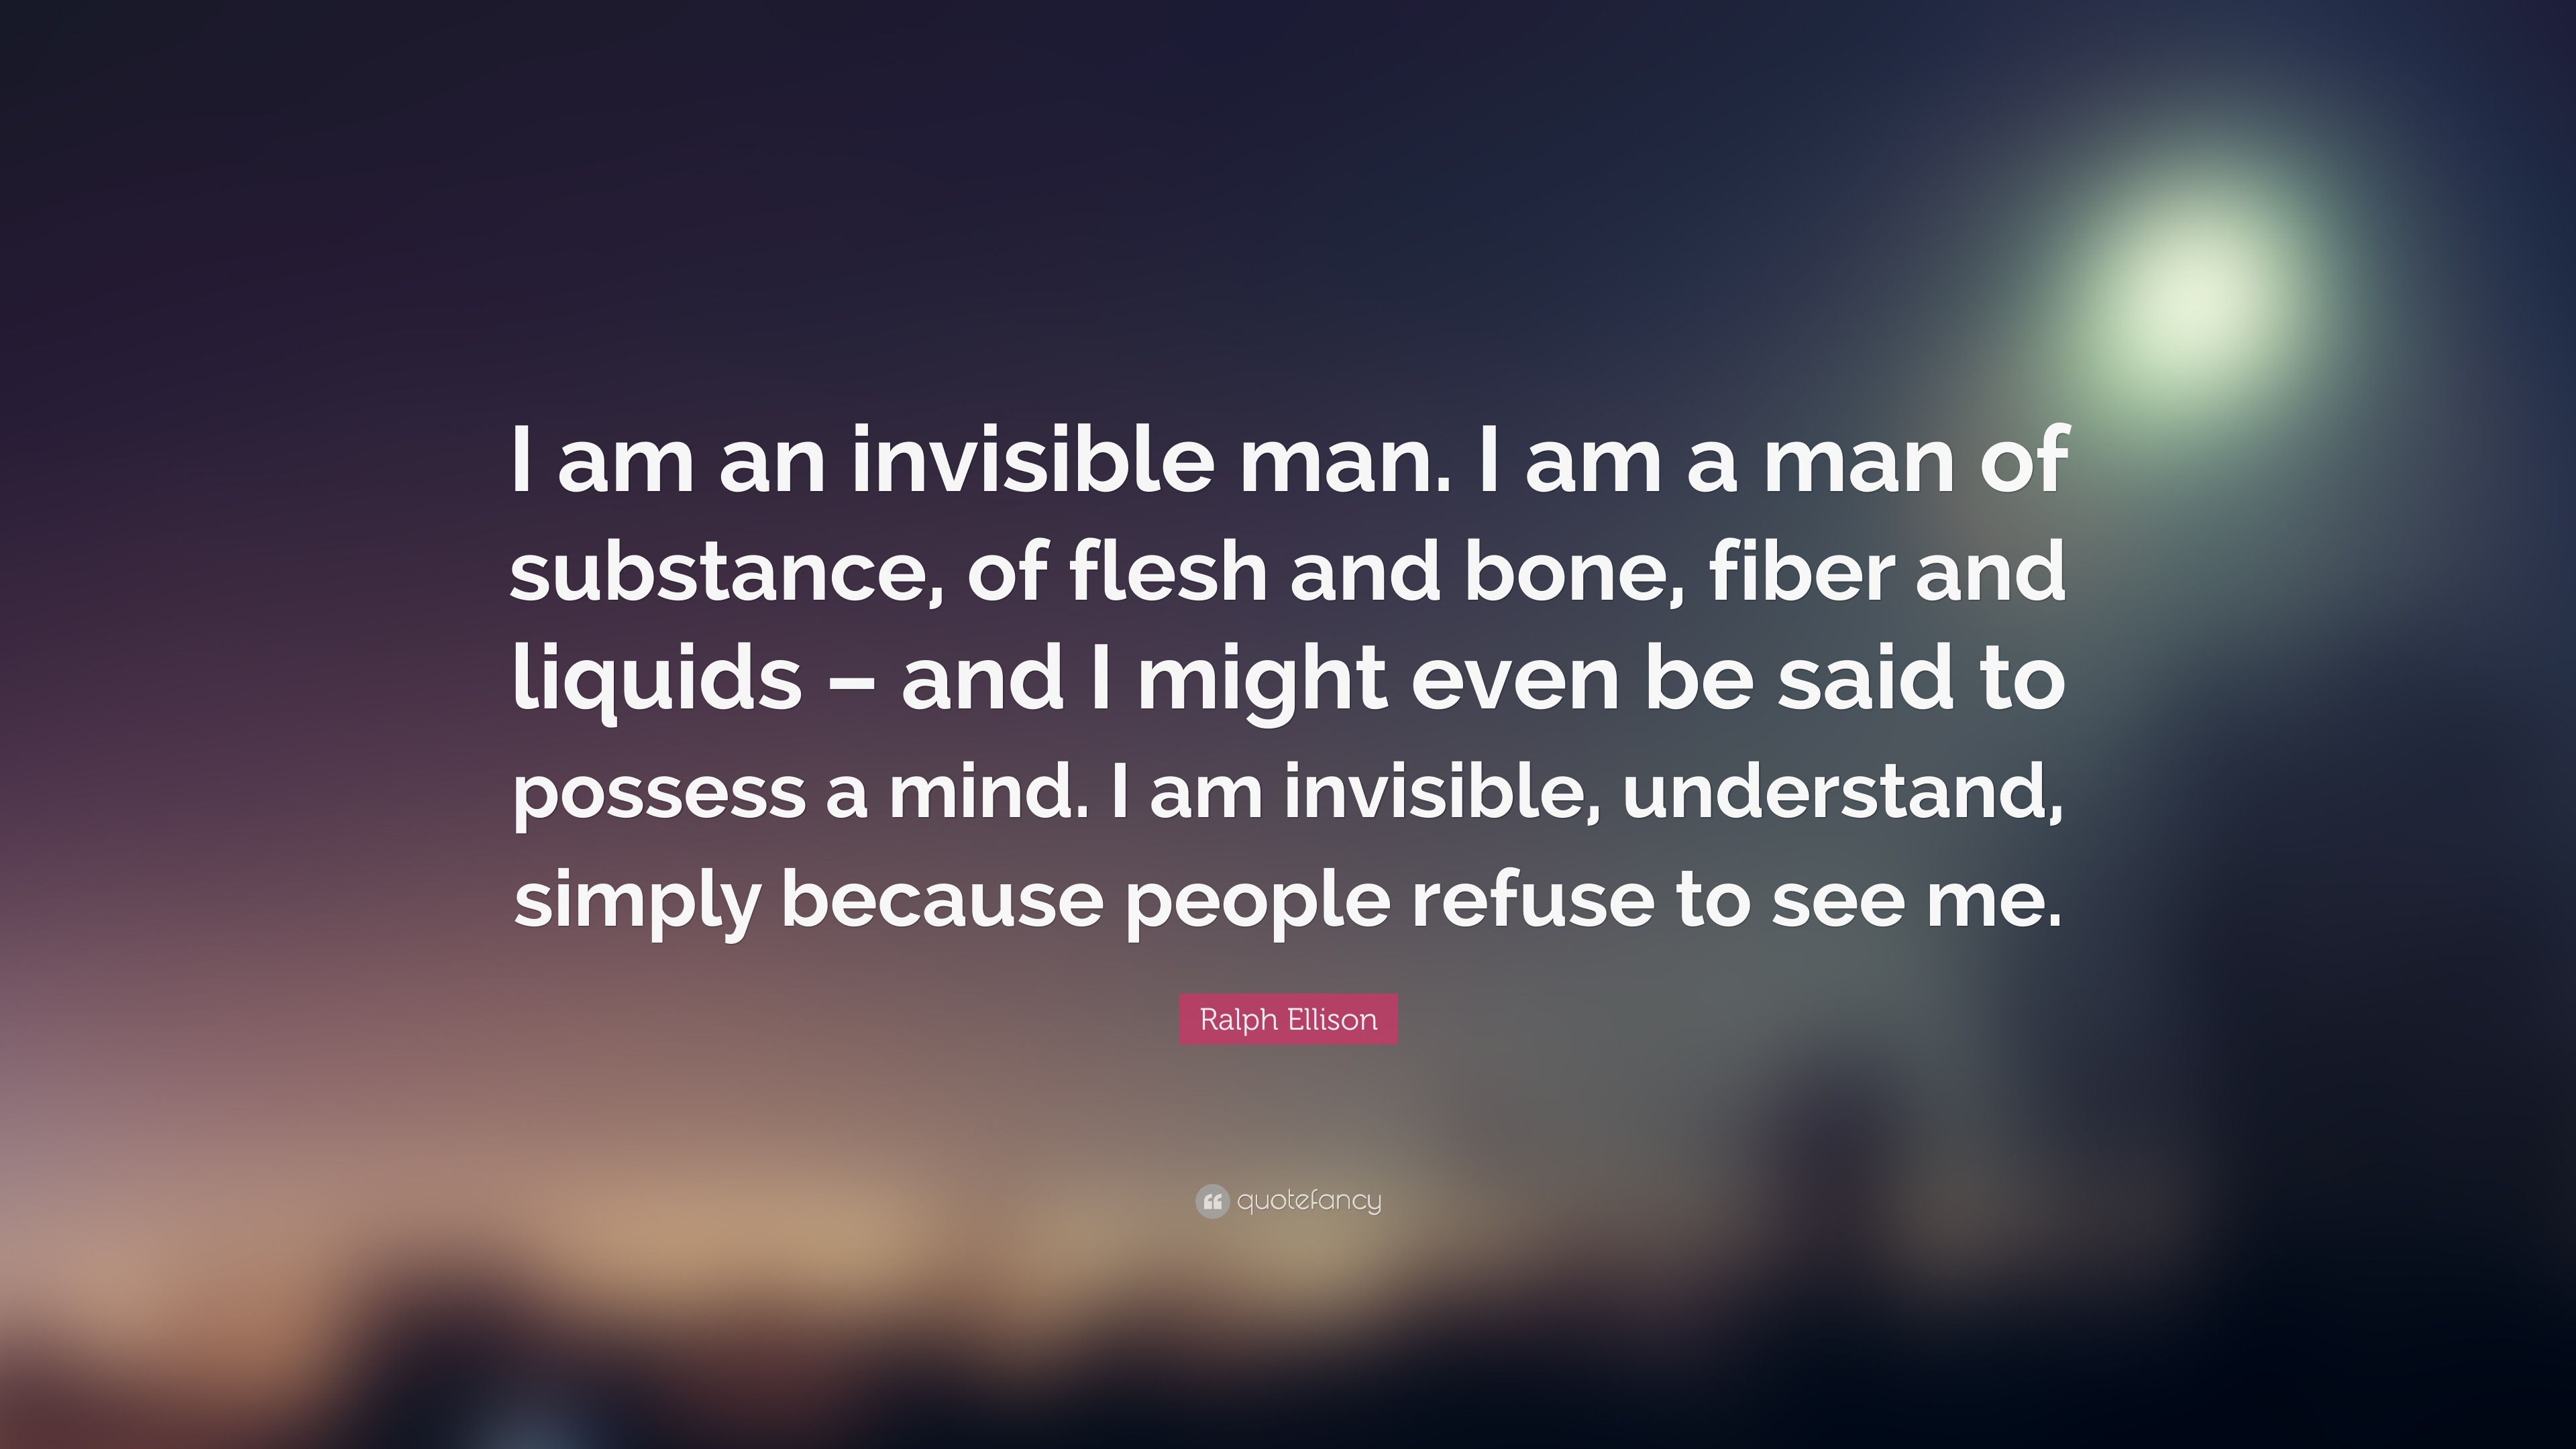 Ralph Ellison Quote: “I Am An Invisible Man. I Am A Man Of Substance, Of Flesh And Bone, Fiber And Liquids – And I Might Even Be Said To Posse...”